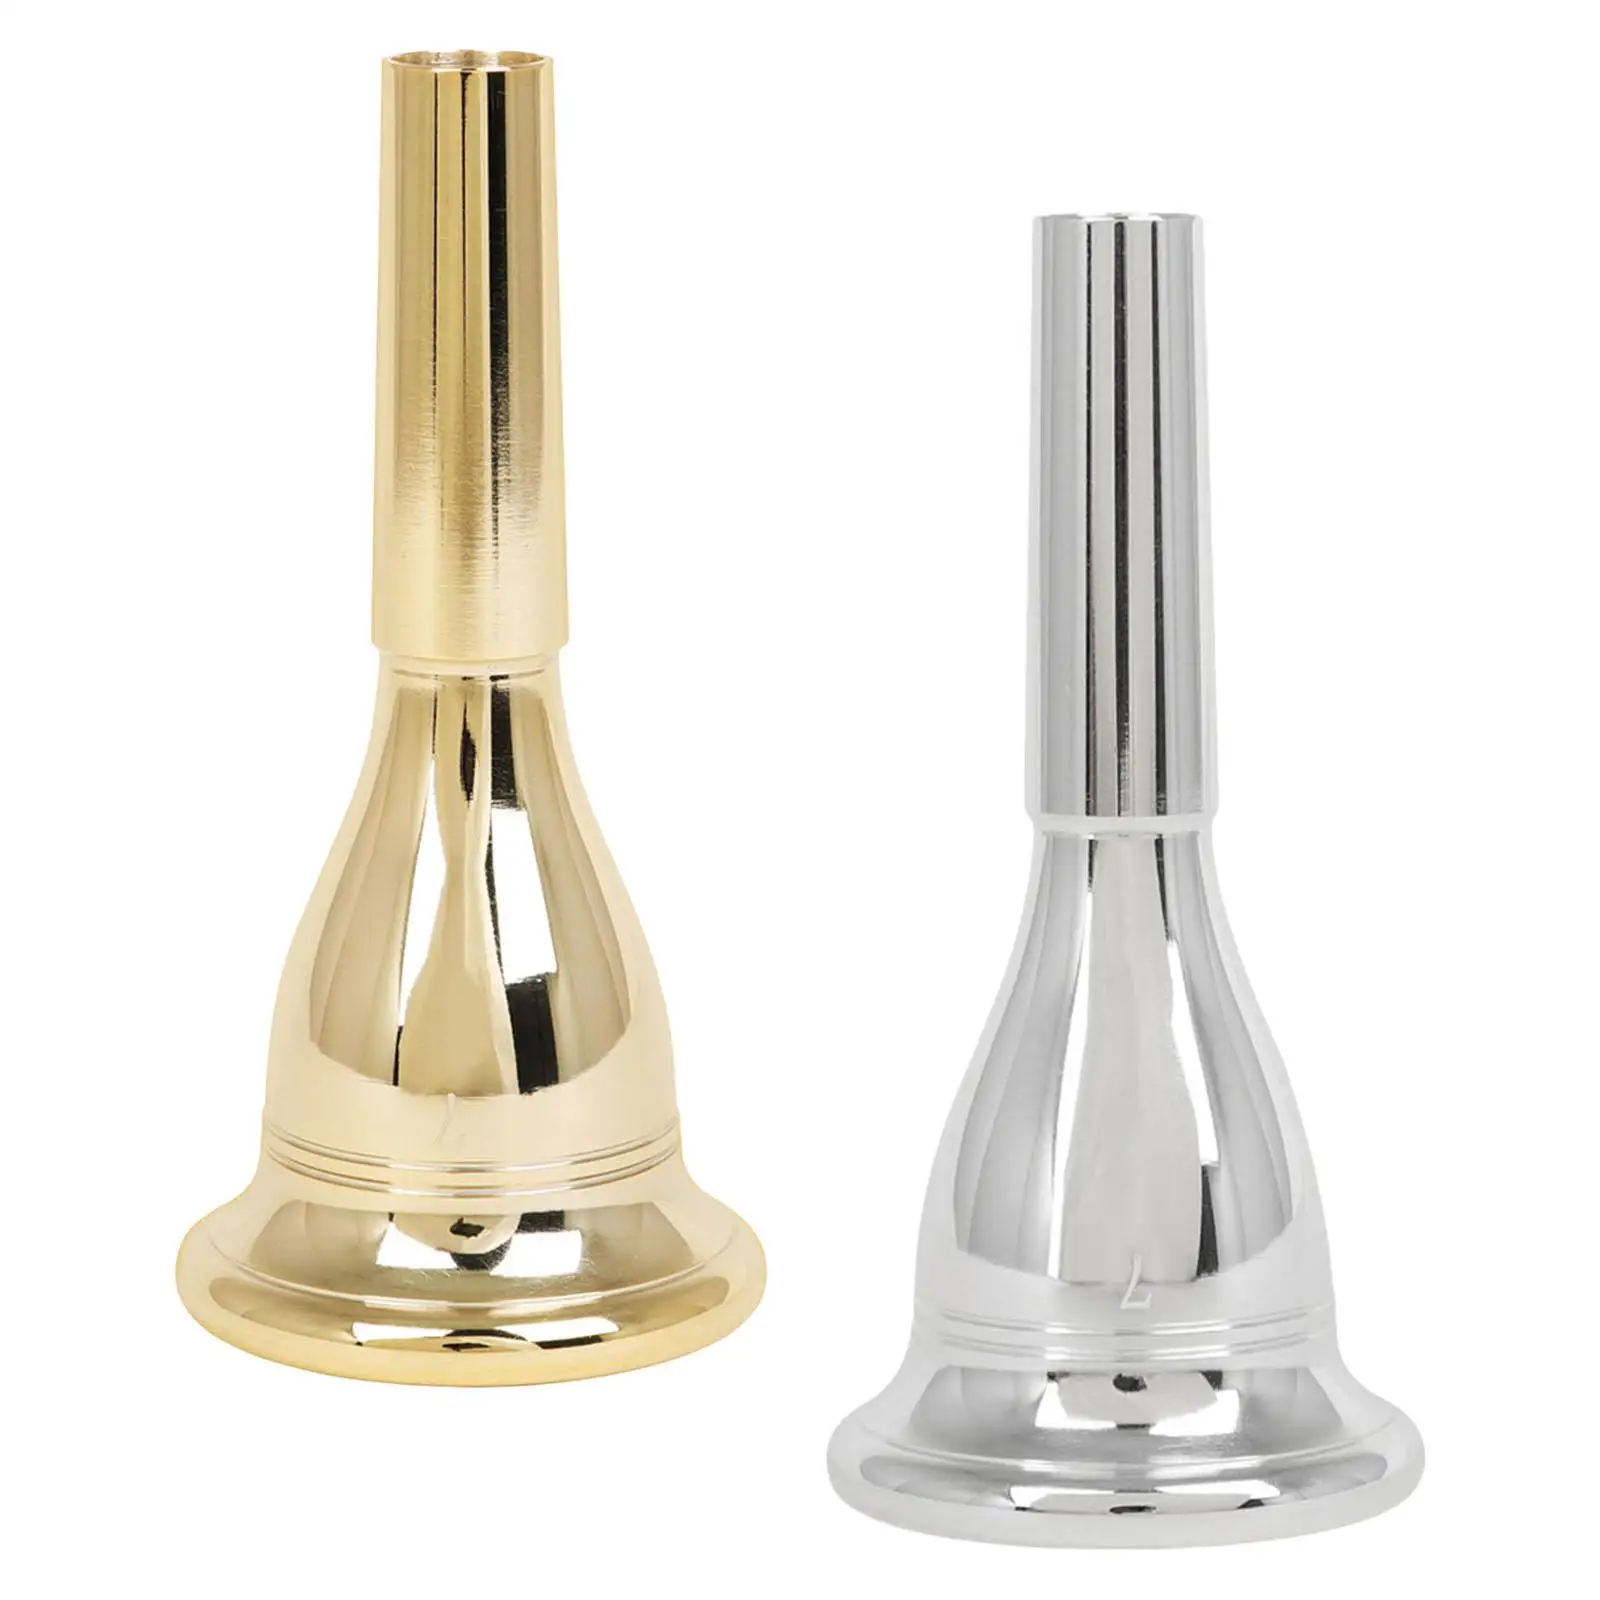 Number 7 Tuba Mouthpiece Instrument Accessories Precise Musical Good Air Tightness Music Parts Brass for Professional